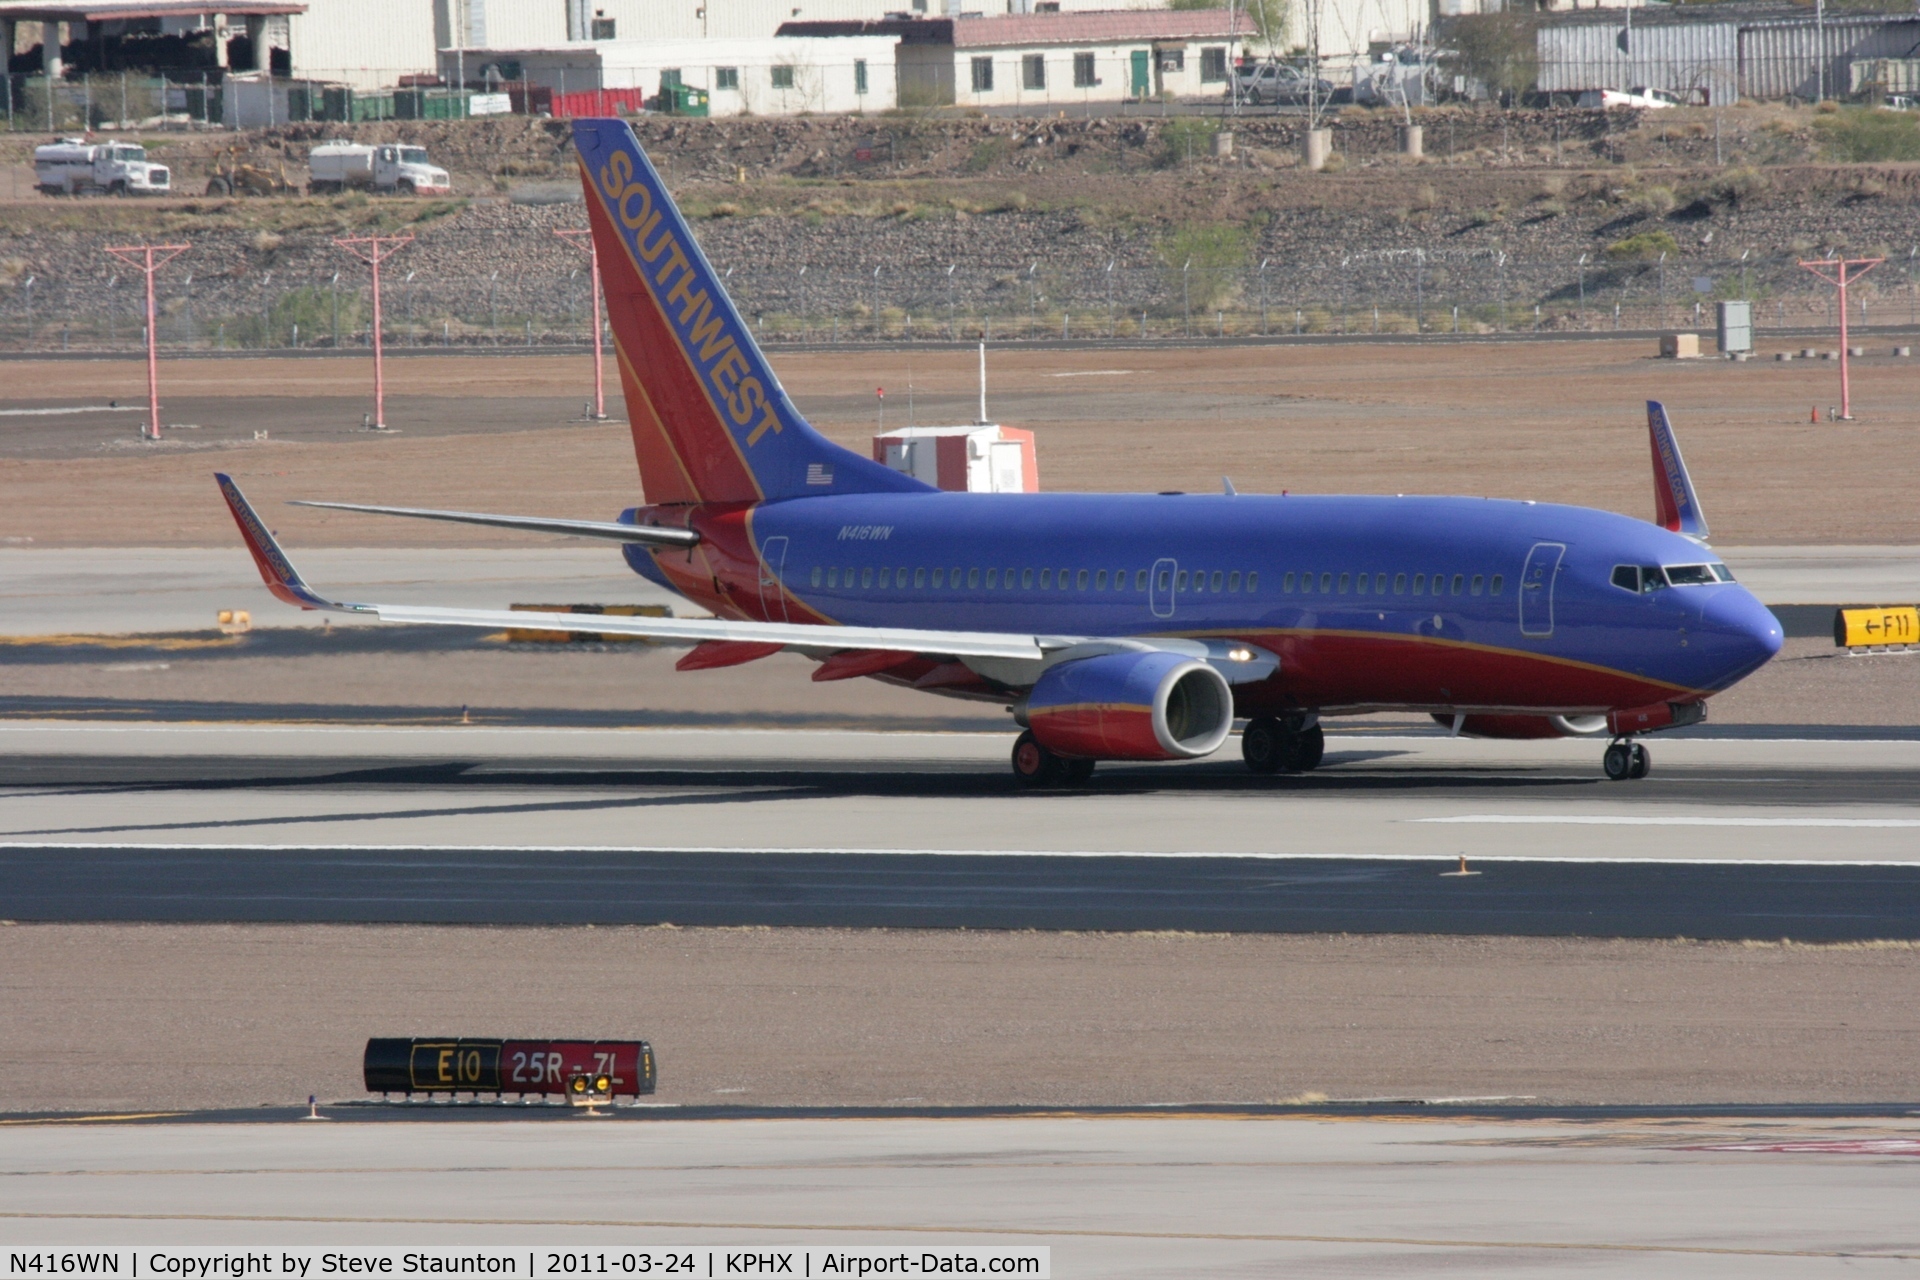 N416WN, 2001 Boeing 737-7H4 C/N 32453, Taken at Phoenix Sky Harbor Airport, in March 2011 whilst on an Aeroprint Aviation tour